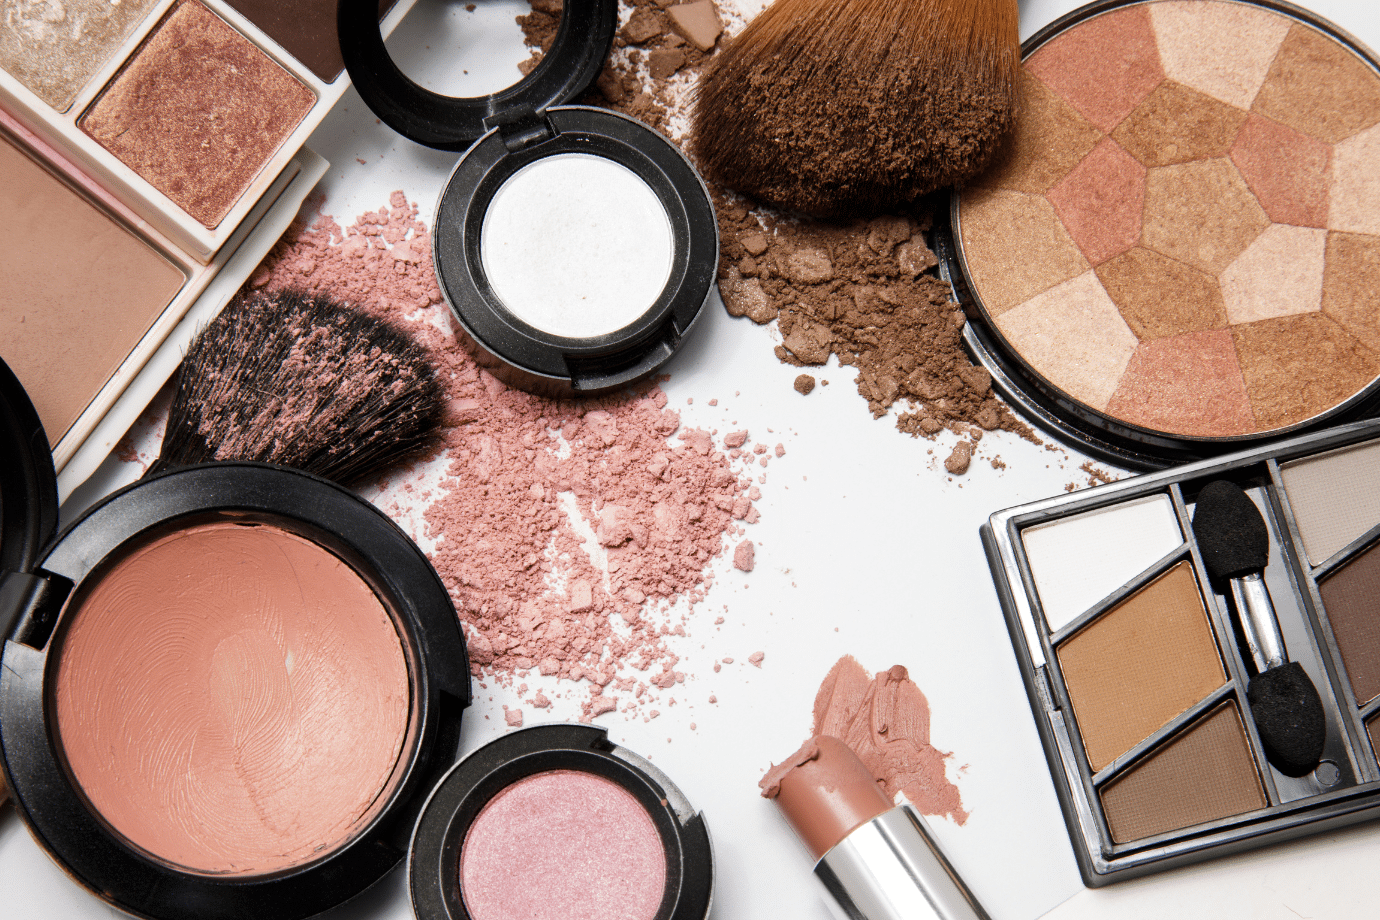 Signs That Your Makeup Has Expired